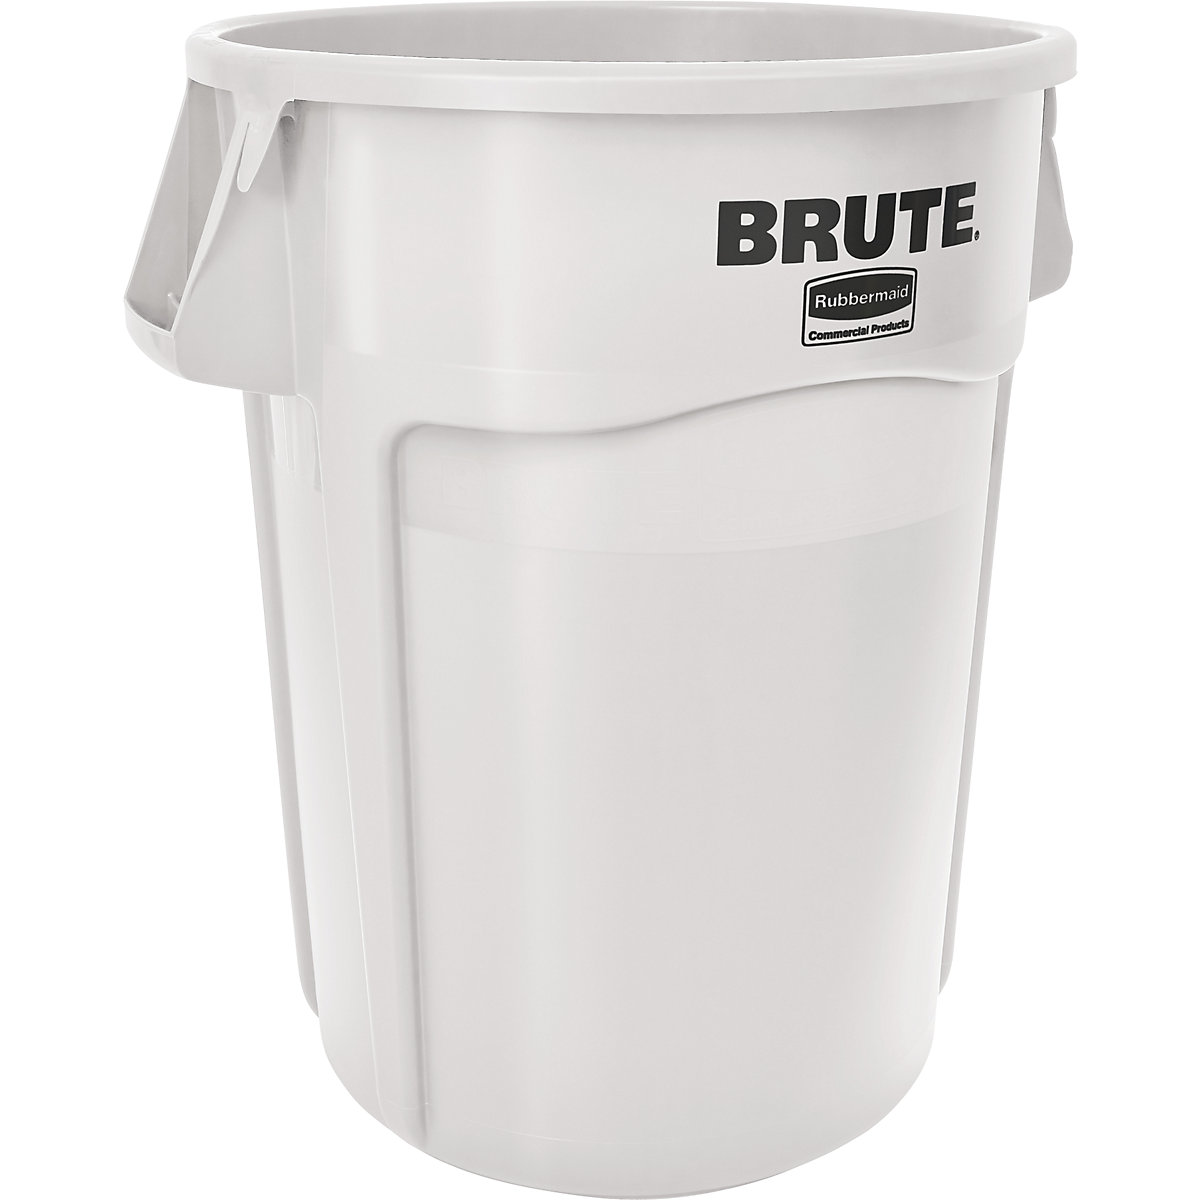 BRUTE® universal container, round – Rubbermaid, capacity 166 l, white-10